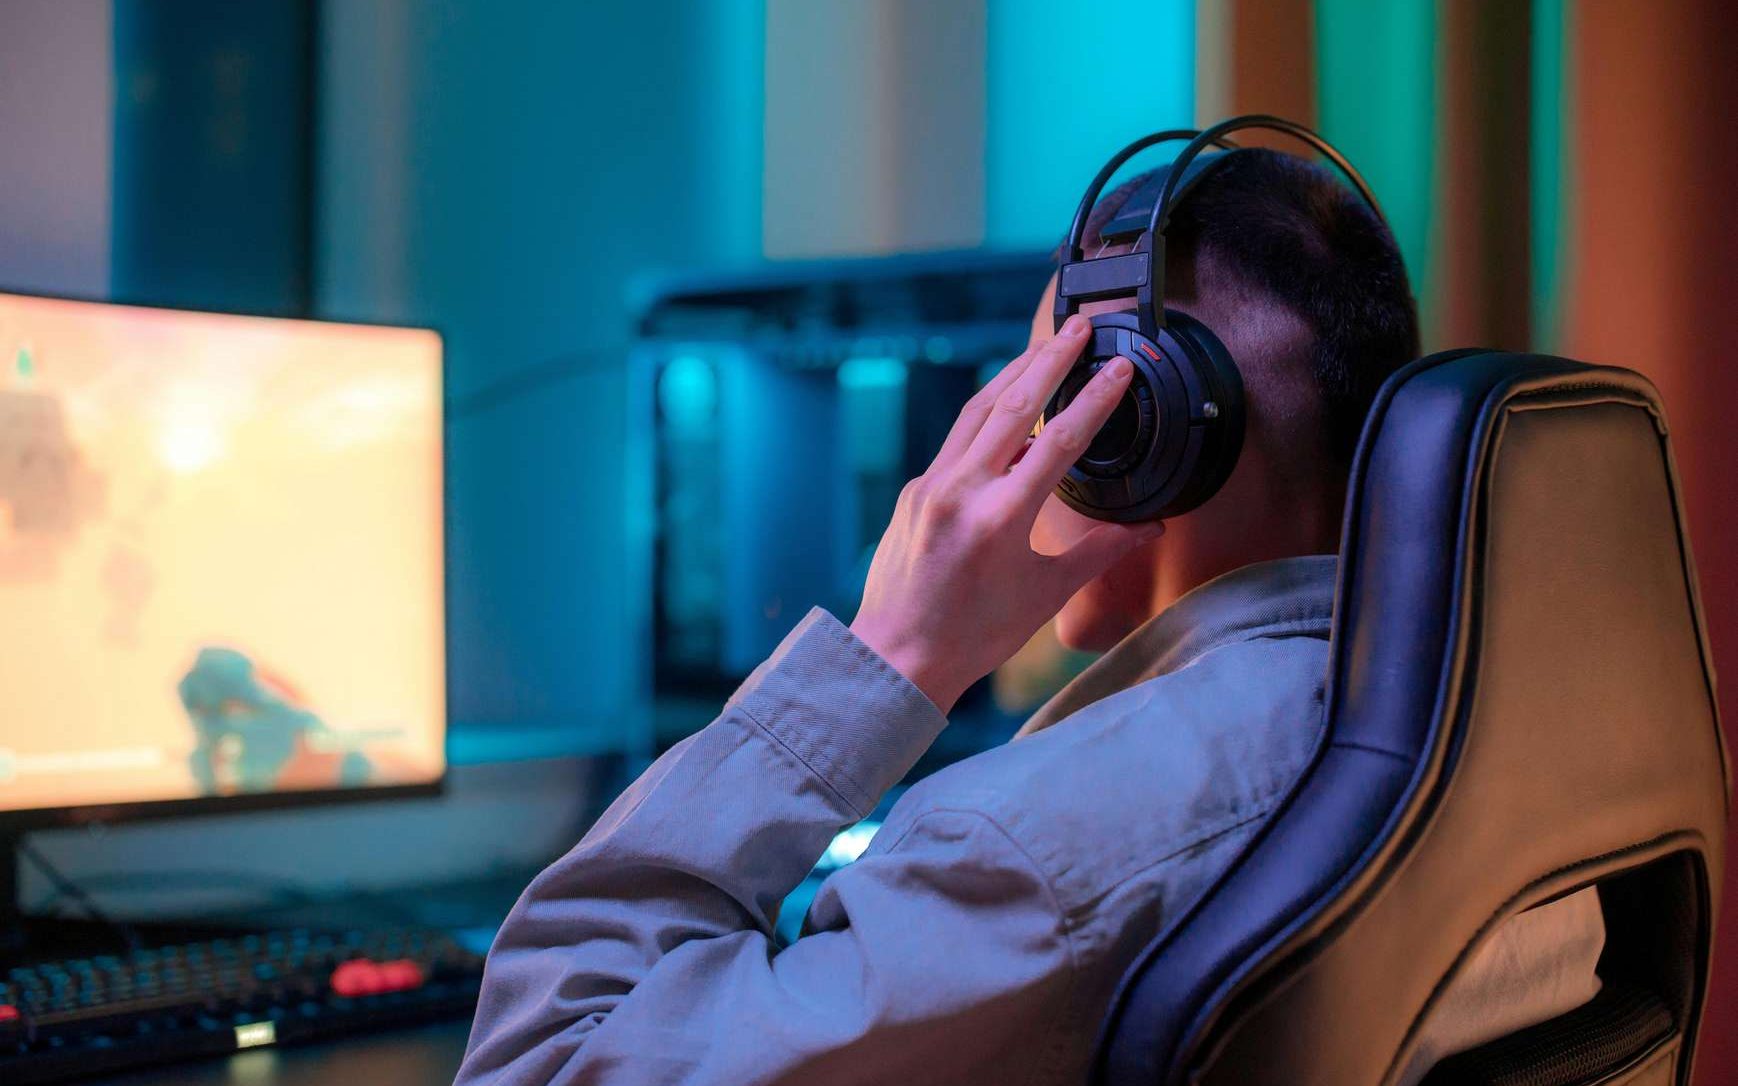 University of Suffolk to launch esports undergraduate course in 2025